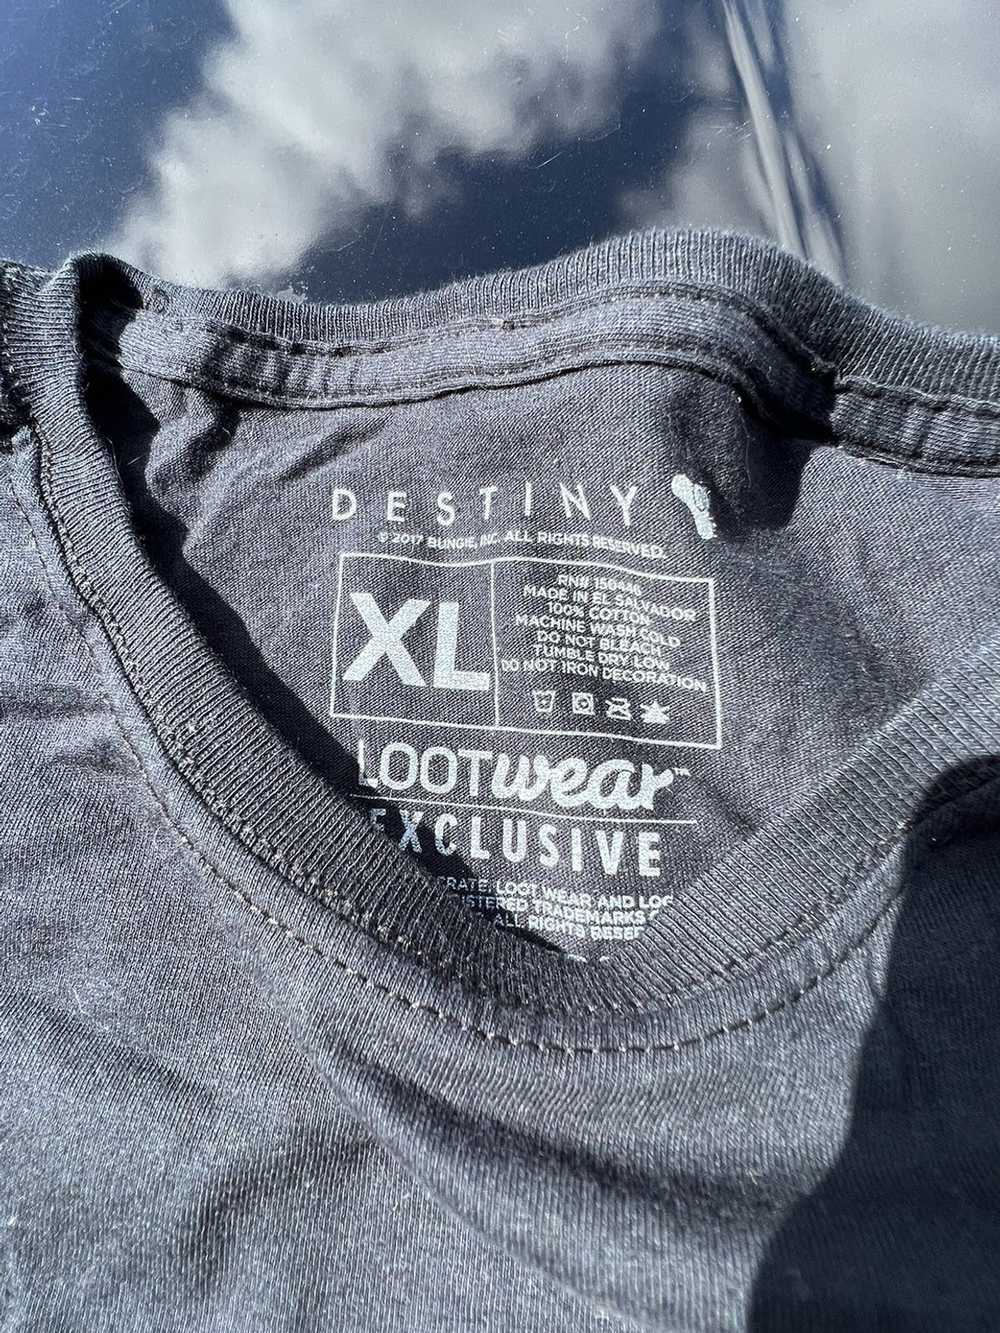 The Game Destiny 2 lootwear game promo tee - image 3